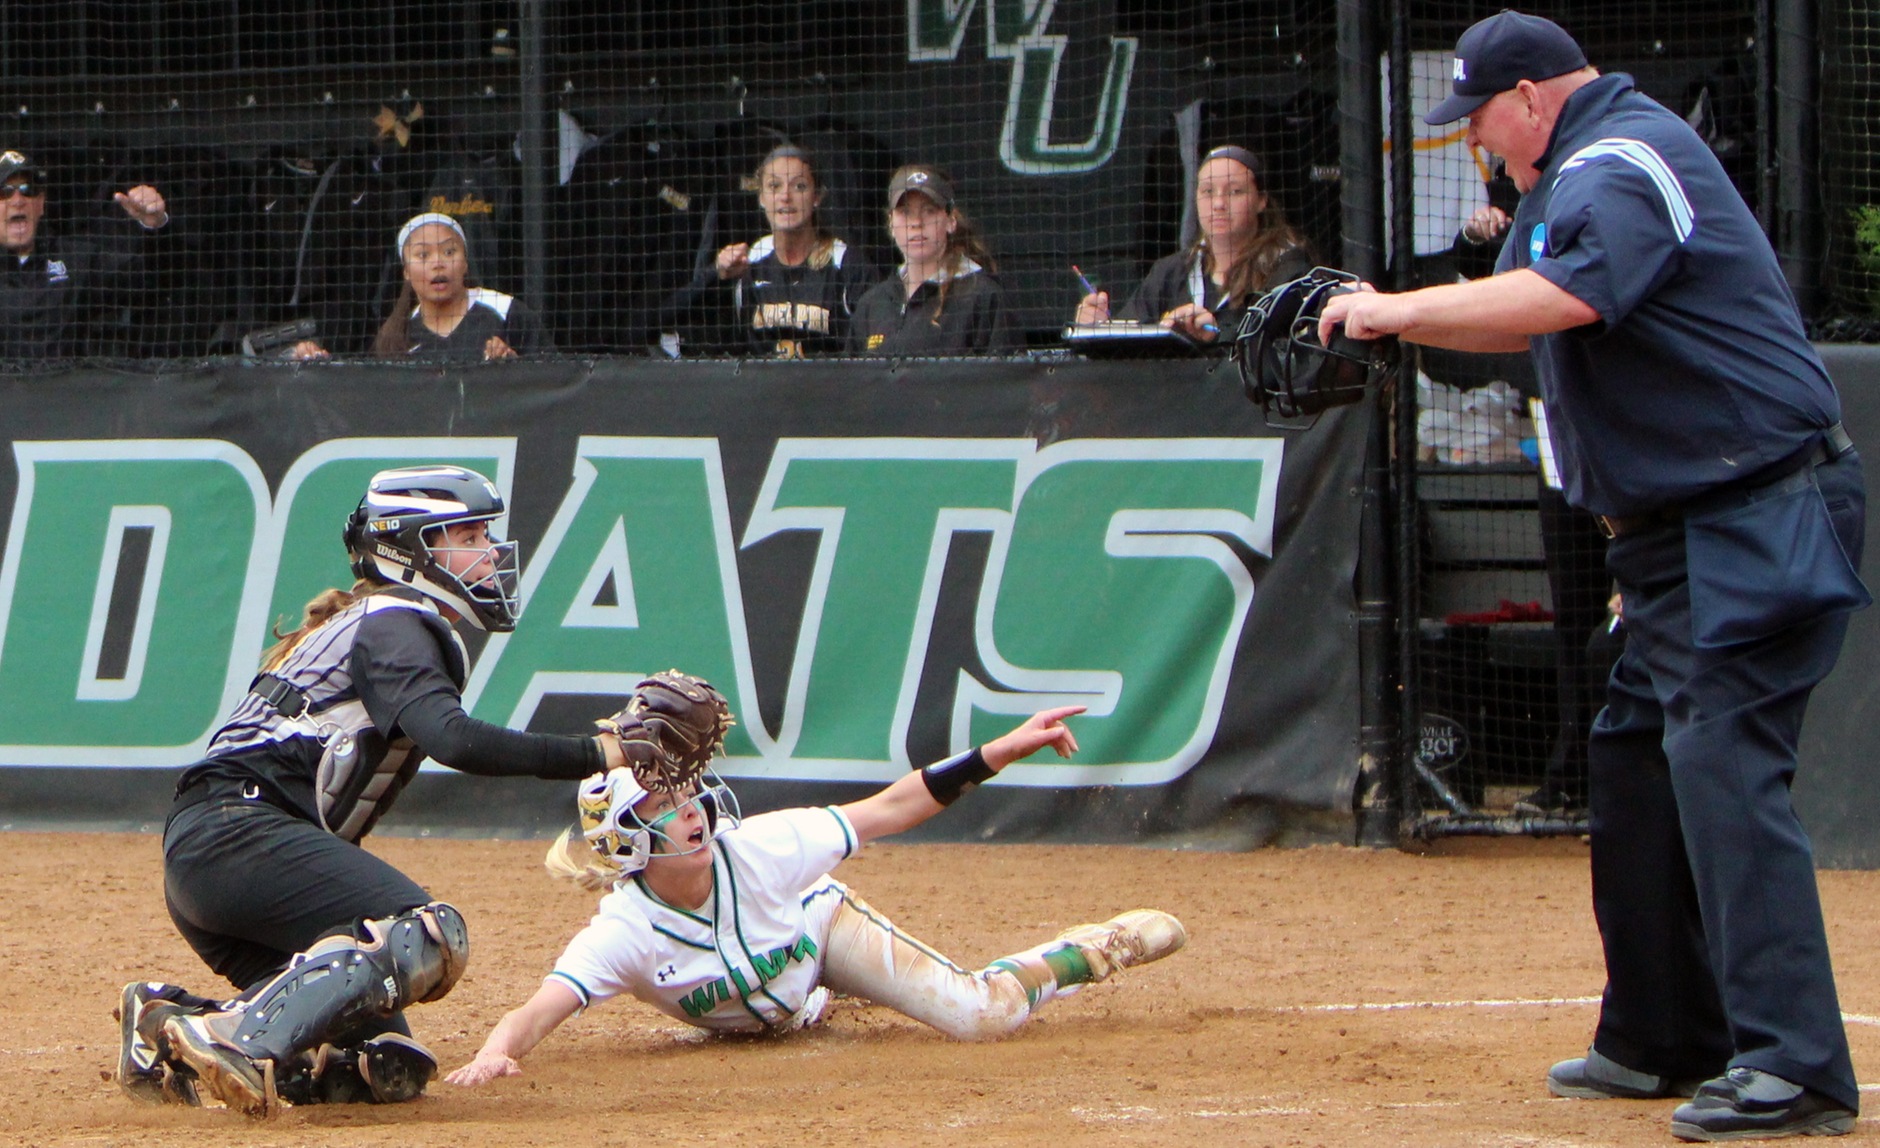 Copyright 2019: Wilmington University. All rights reserved. Photo of Courtney Dellinger scoring the game-tying run in the bottom of the 7th against Adelphi in the Regionals. Photo by Samantha Kelley. May 9, 2019.